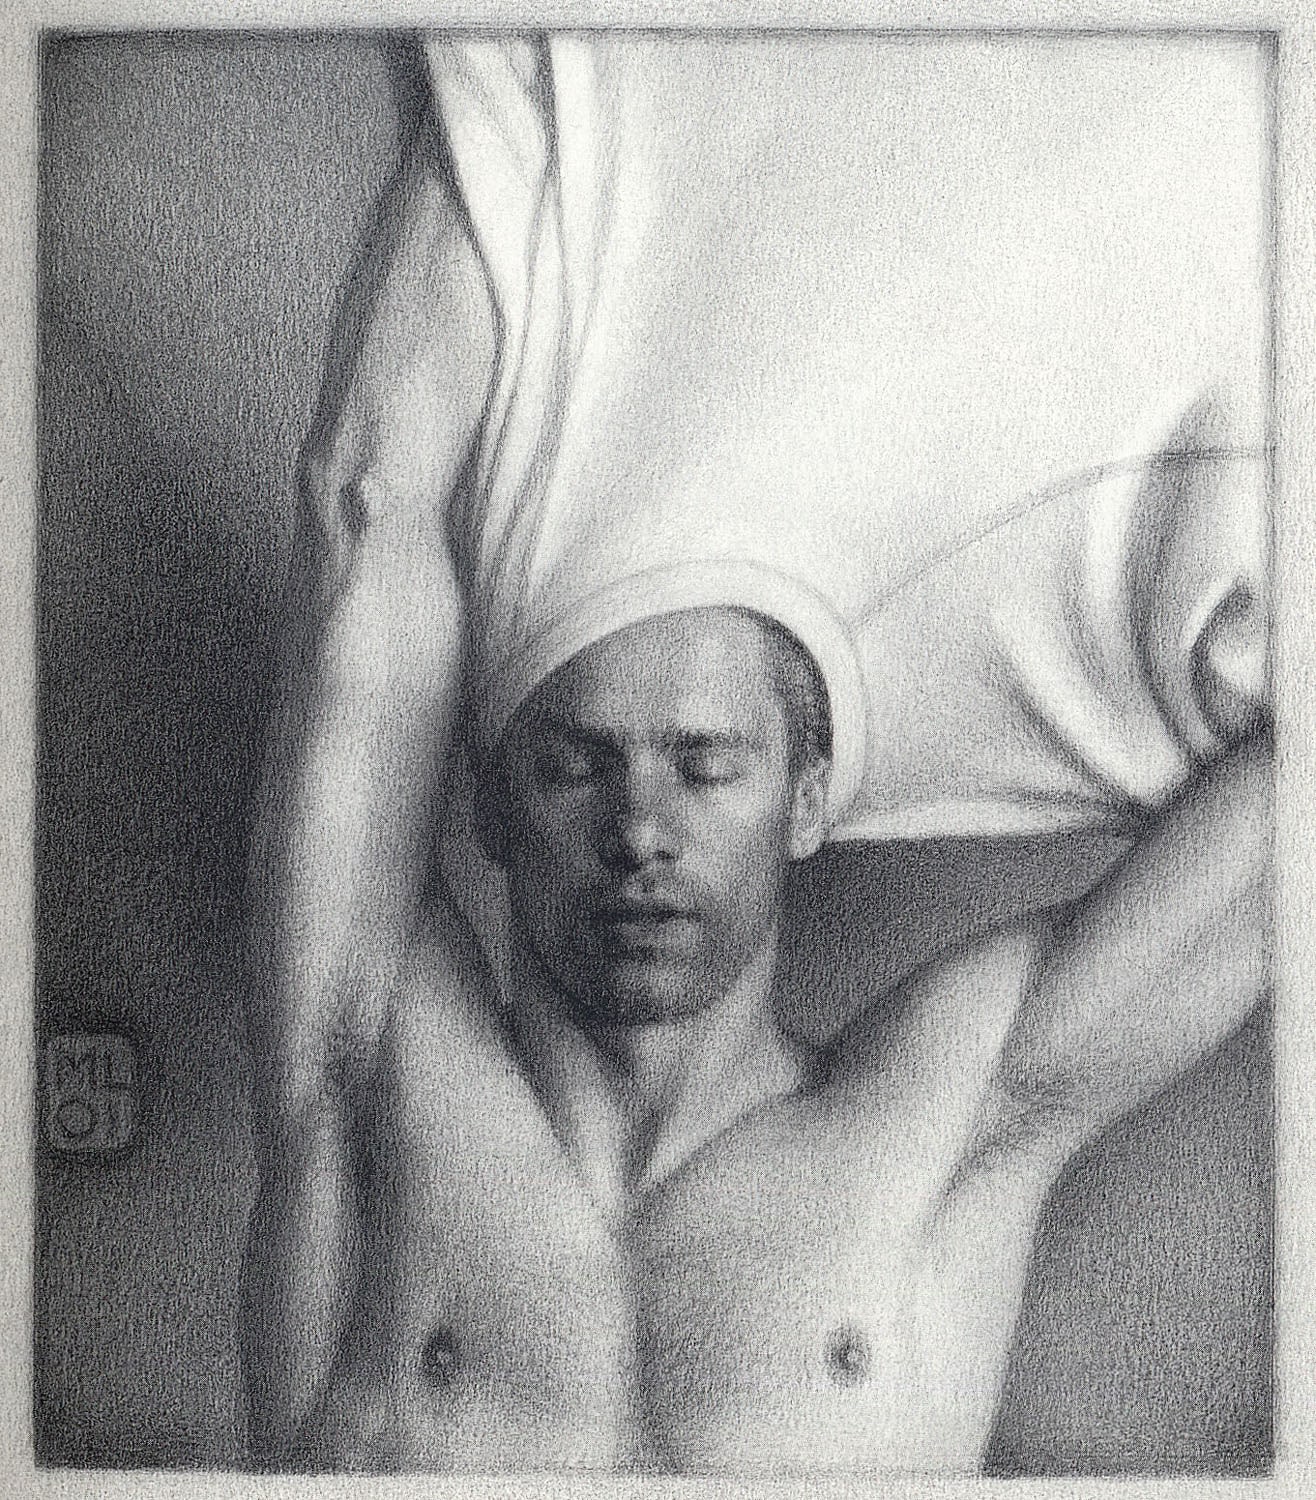 Michael Leonard, Taking Off (SOLD), 2002, graphite pencil on paper, 8 3/8 x 7 1/4 inches